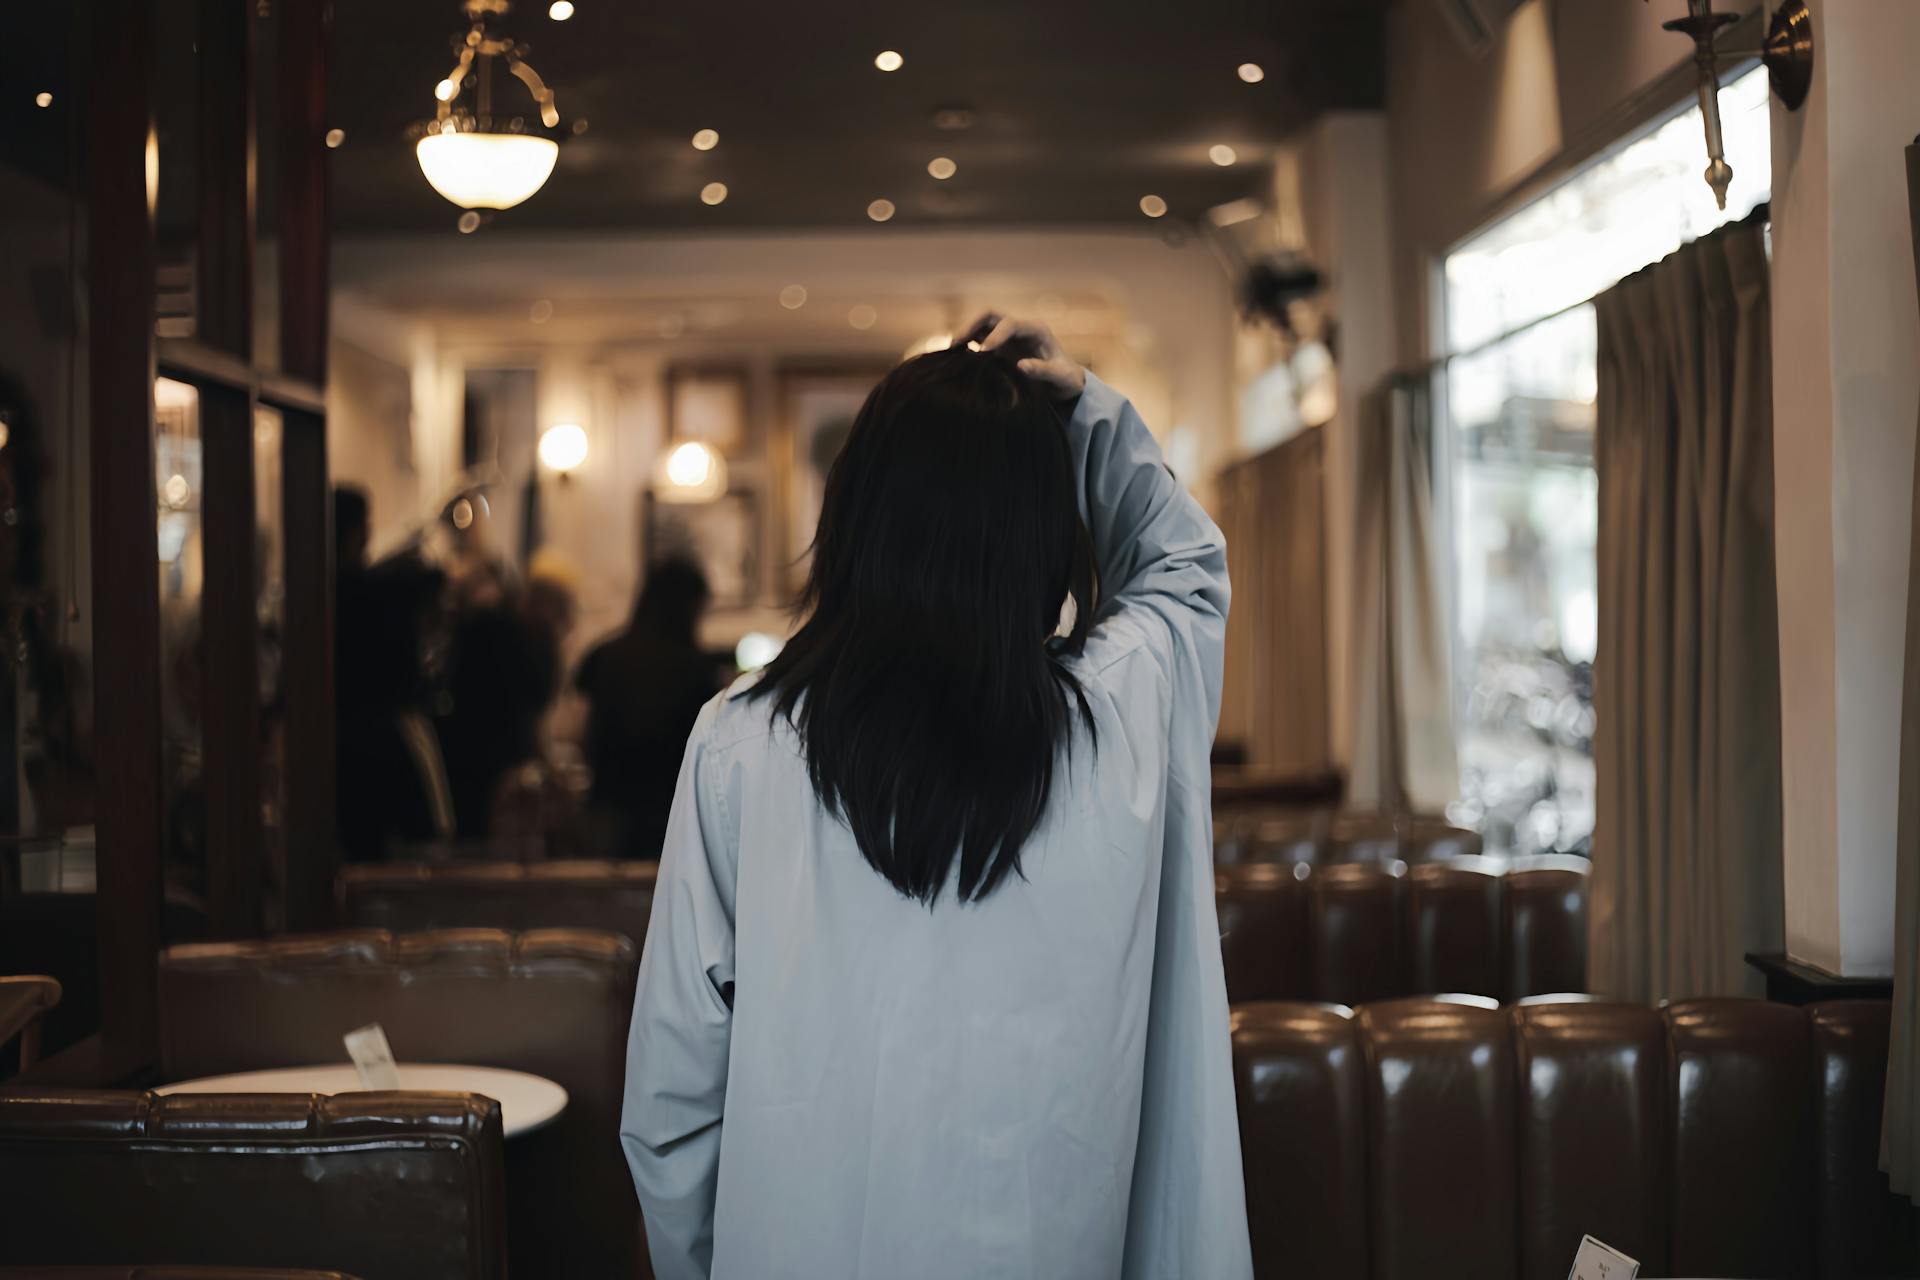 The back-view of a woman walking in a restaurant | Source: Pexels